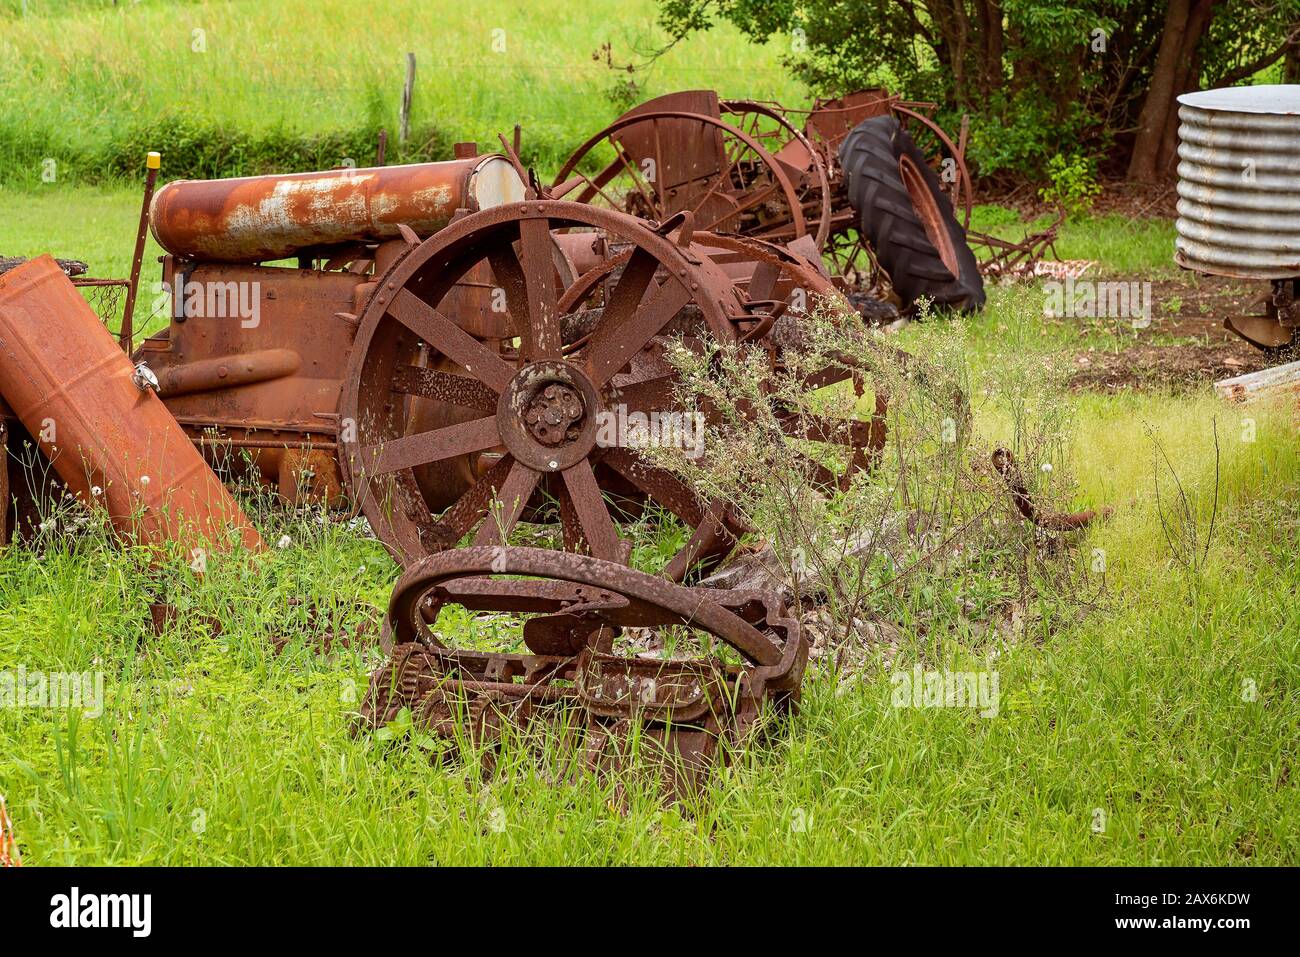 Old Rusted Farm Machinery From A Bygone Era Lying In An Overgrown Field